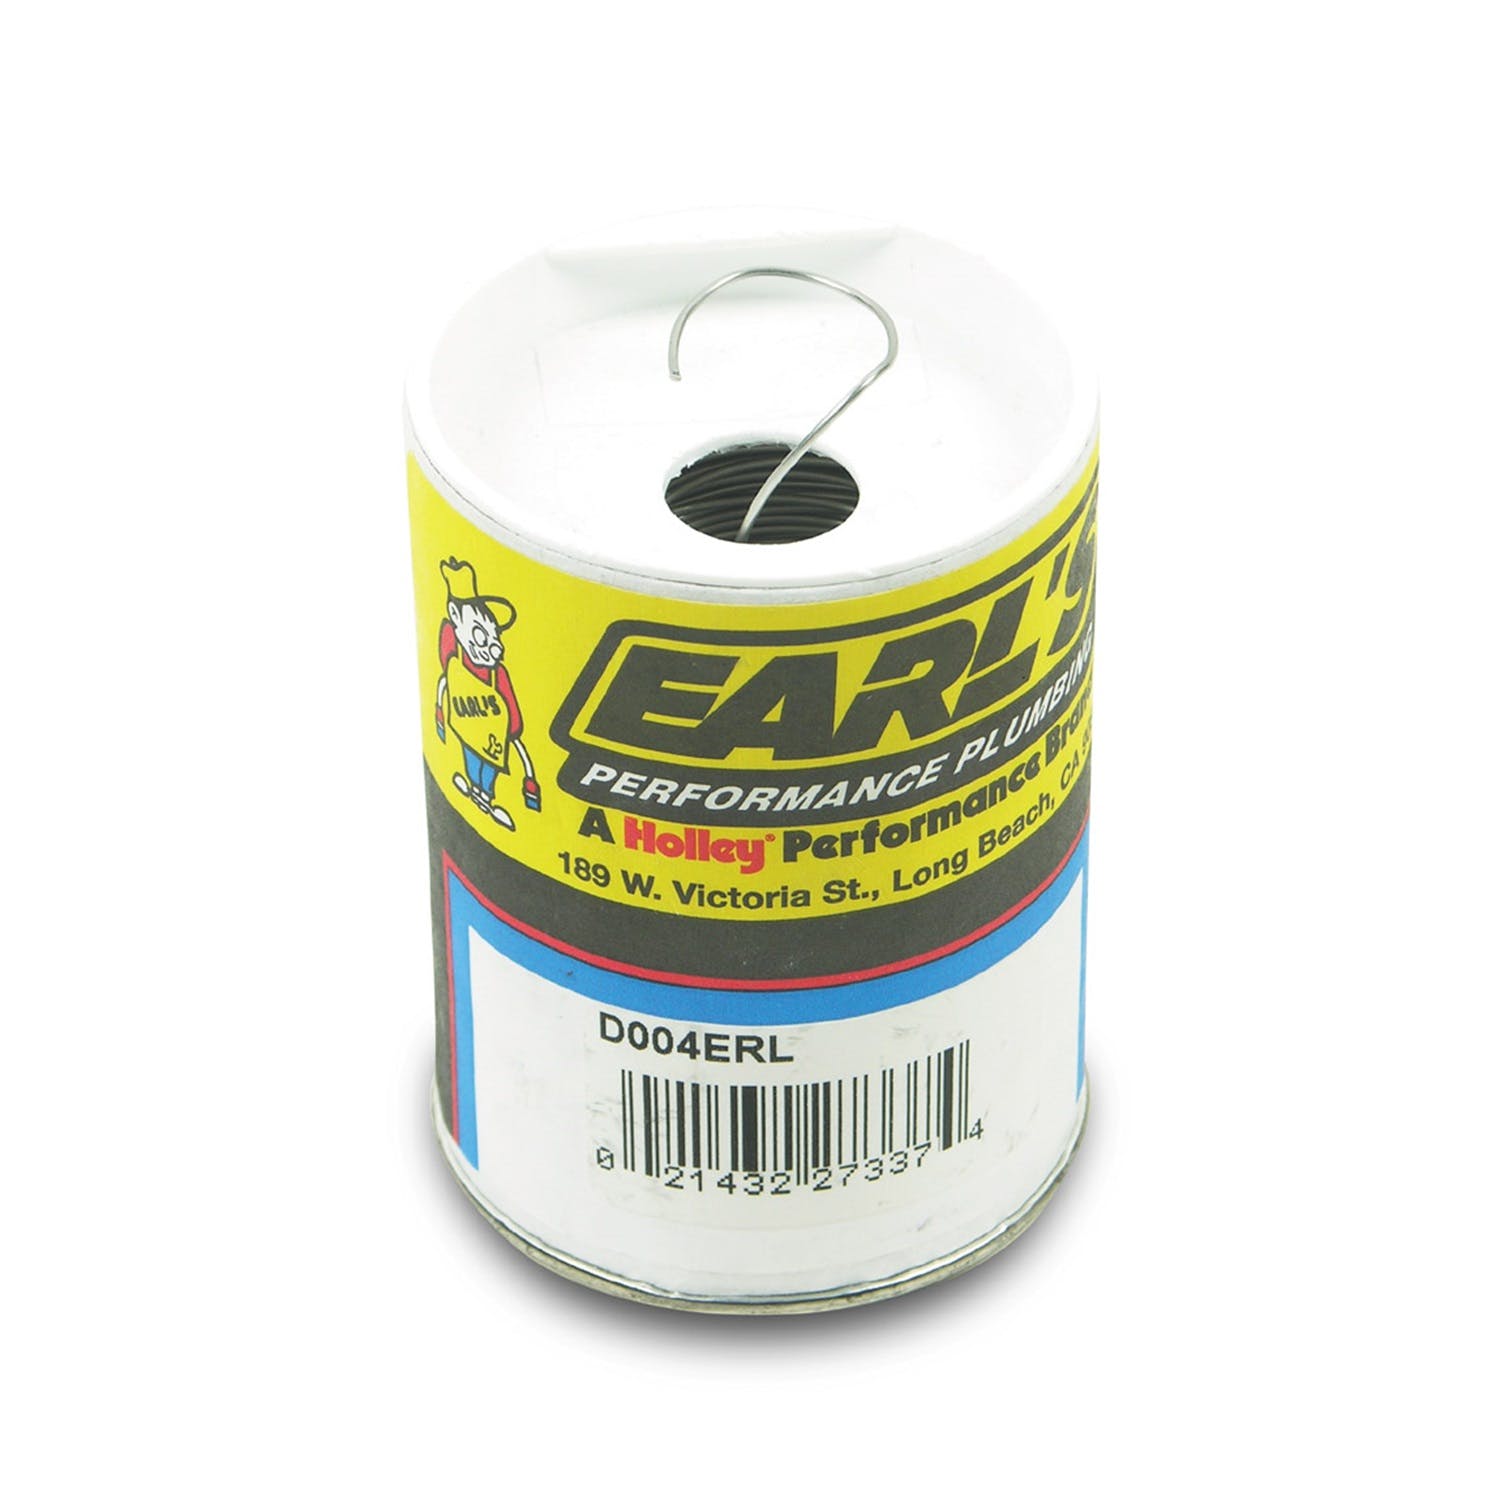 Earl's Performance Plumbing D002ERL .025 Type 302 S.S. Safety Wire